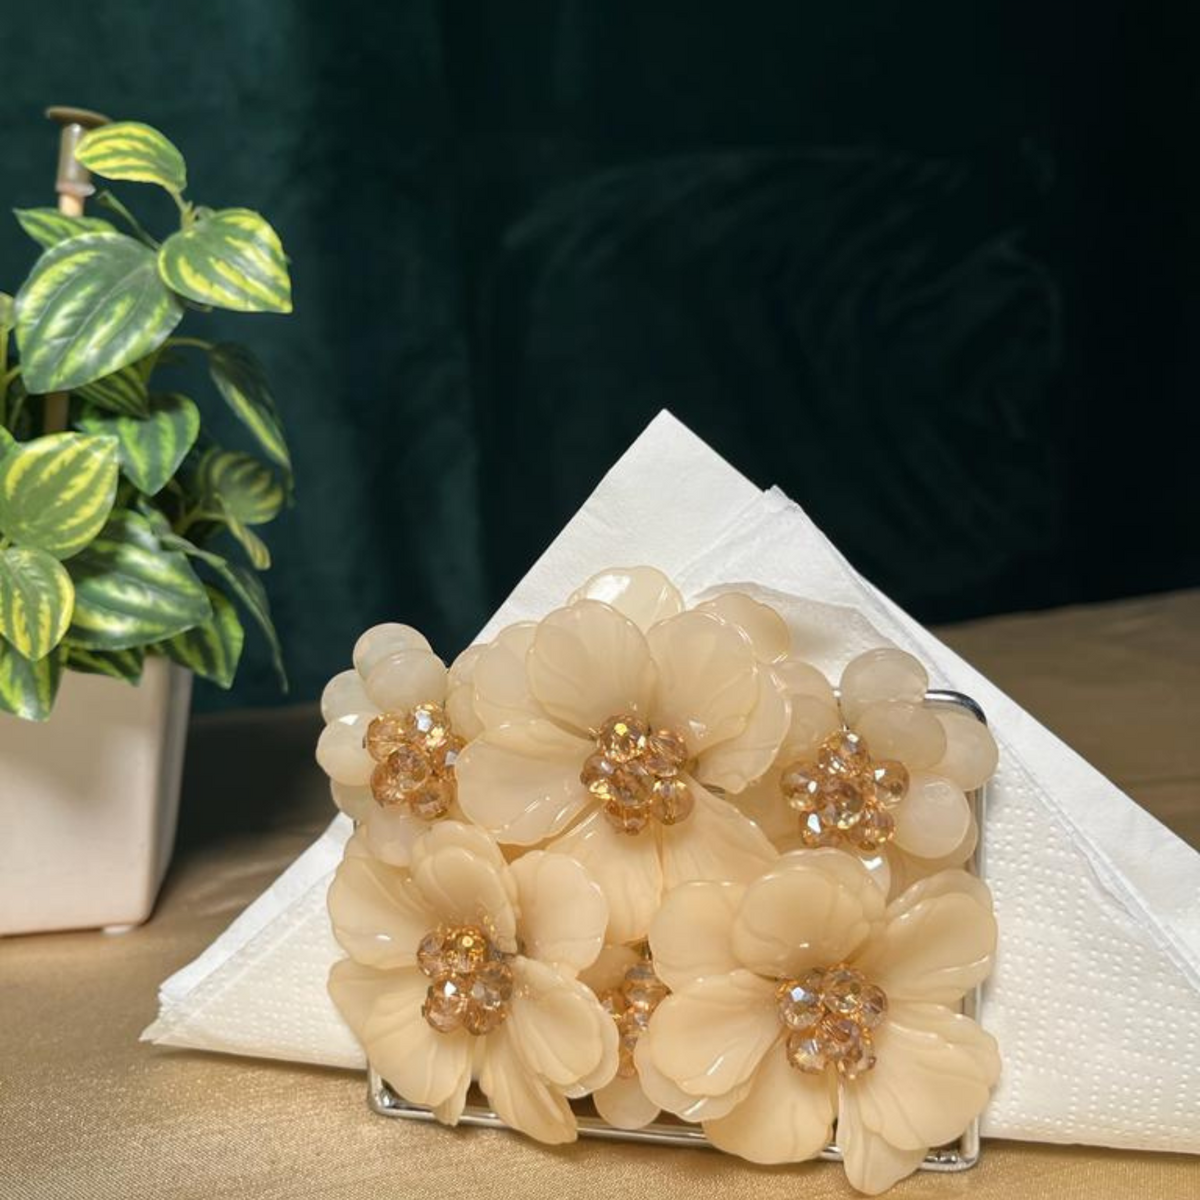 The LuxeLife Beige Floral Tissue Holder